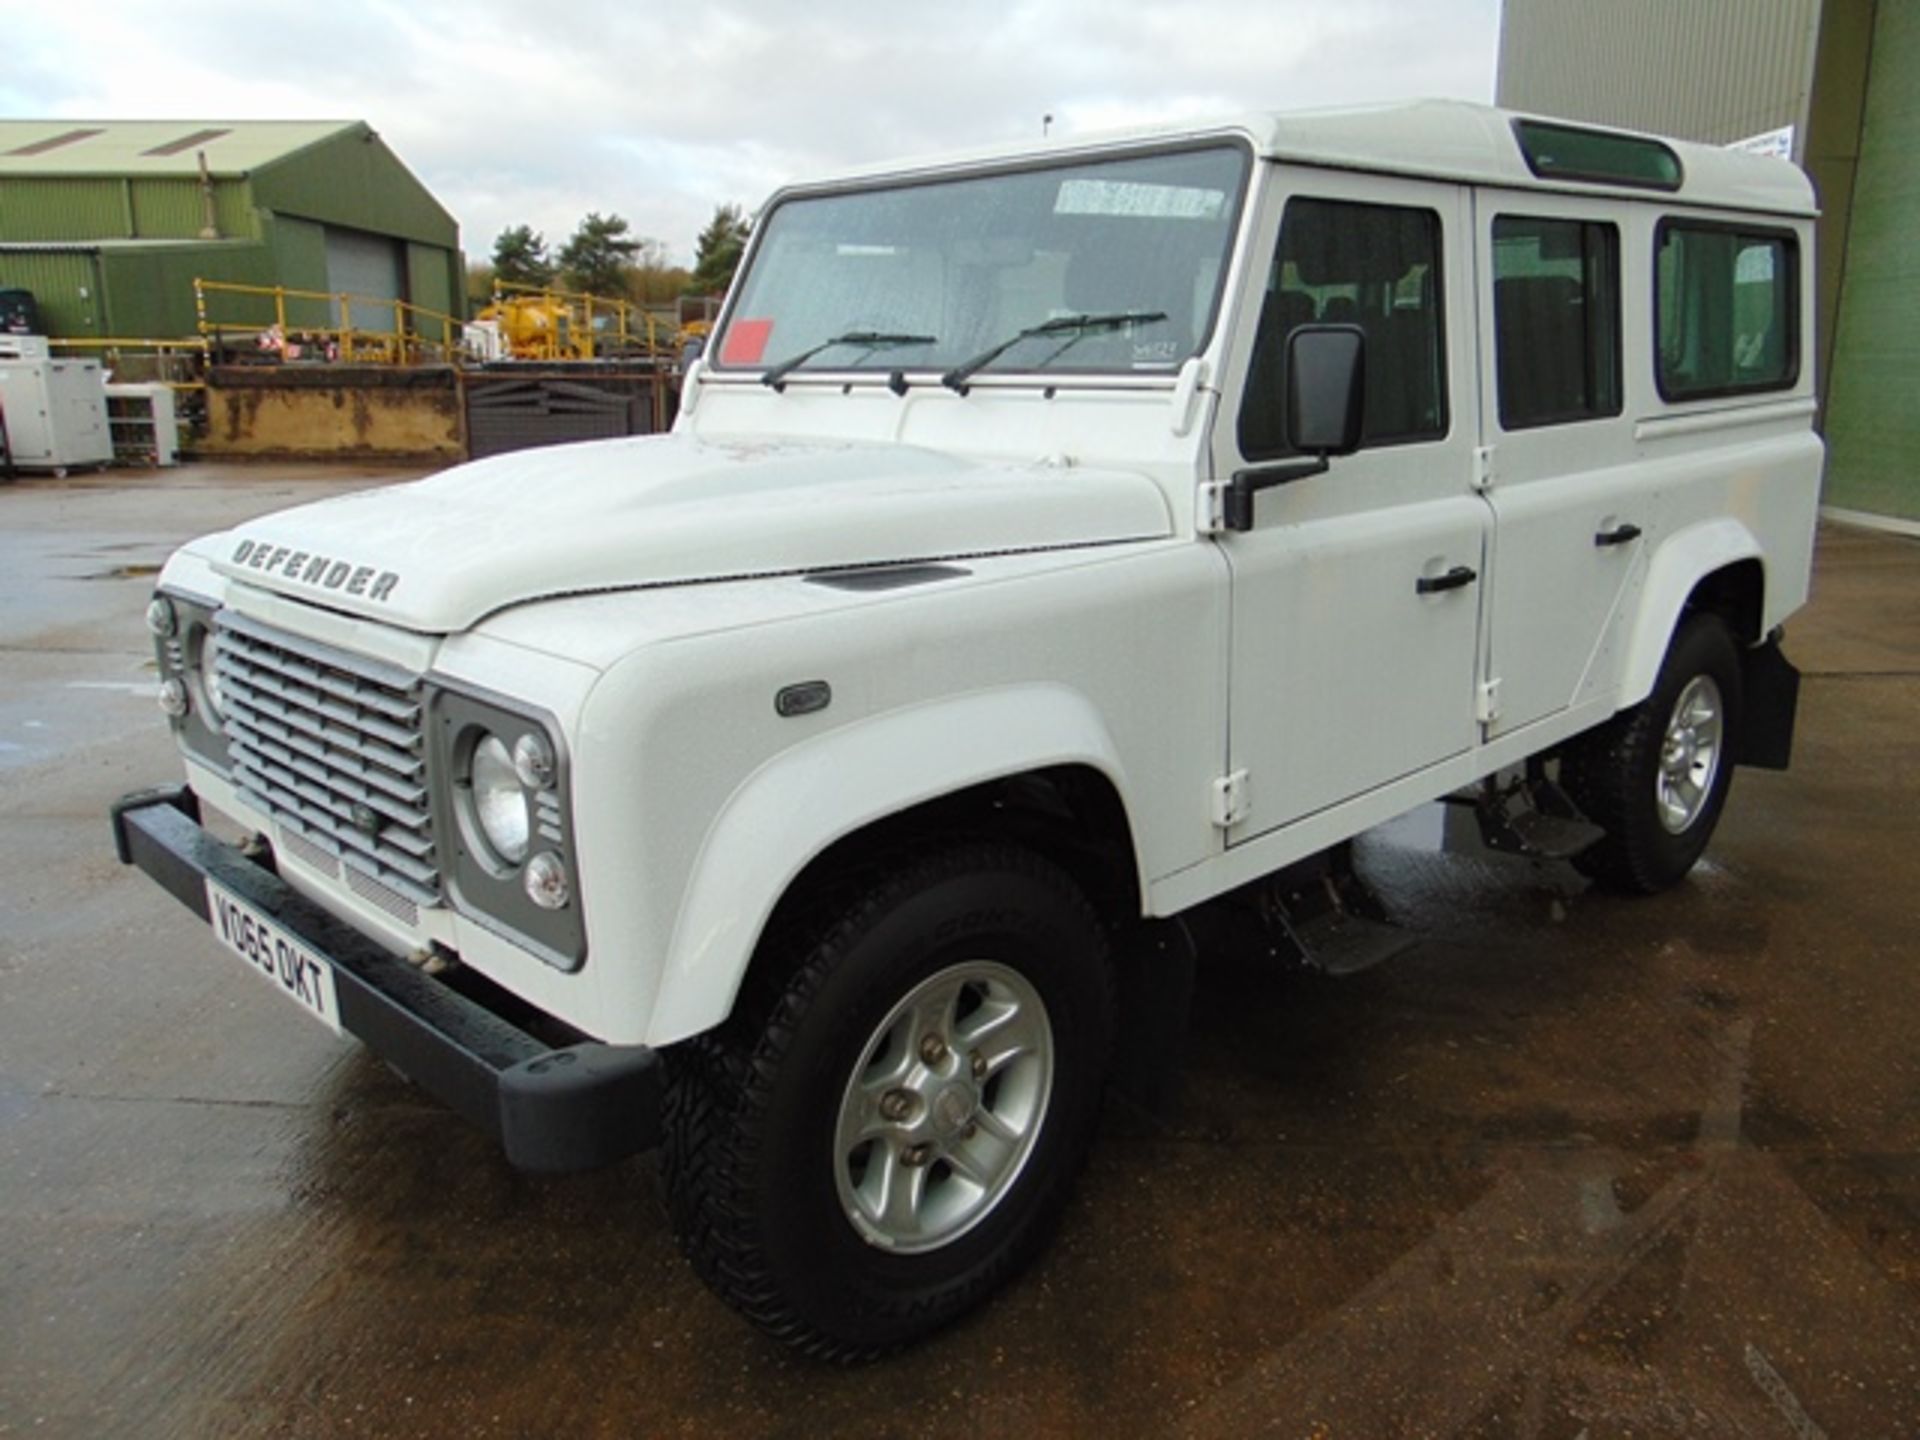 2015 Land Rover Defender 110 5 Door County Station Wagon ONLY 8,915 miles!!! - Image 4 of 24